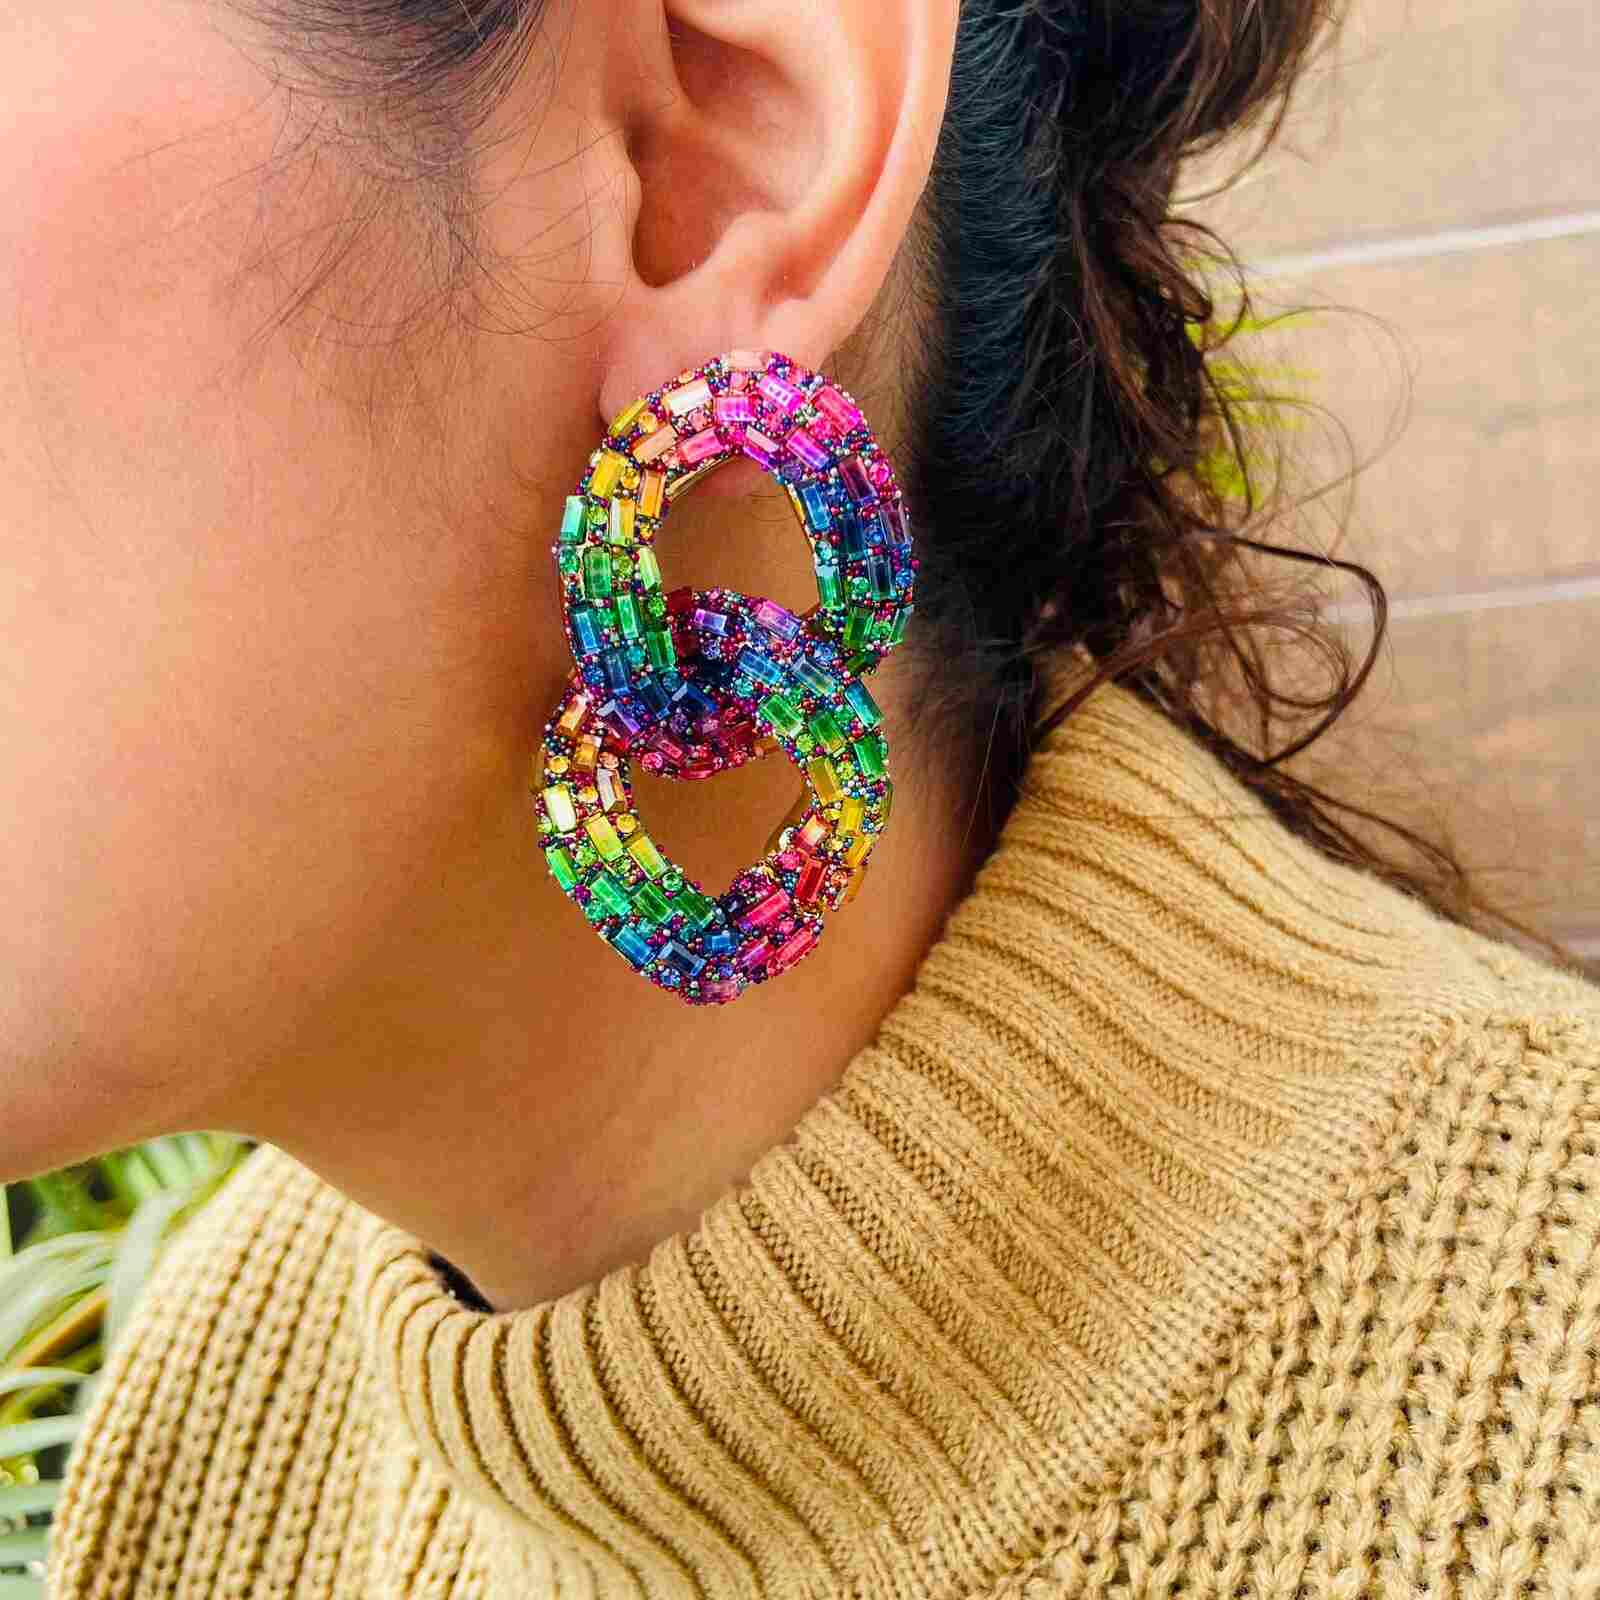 Artificial Earrings for Daily Use